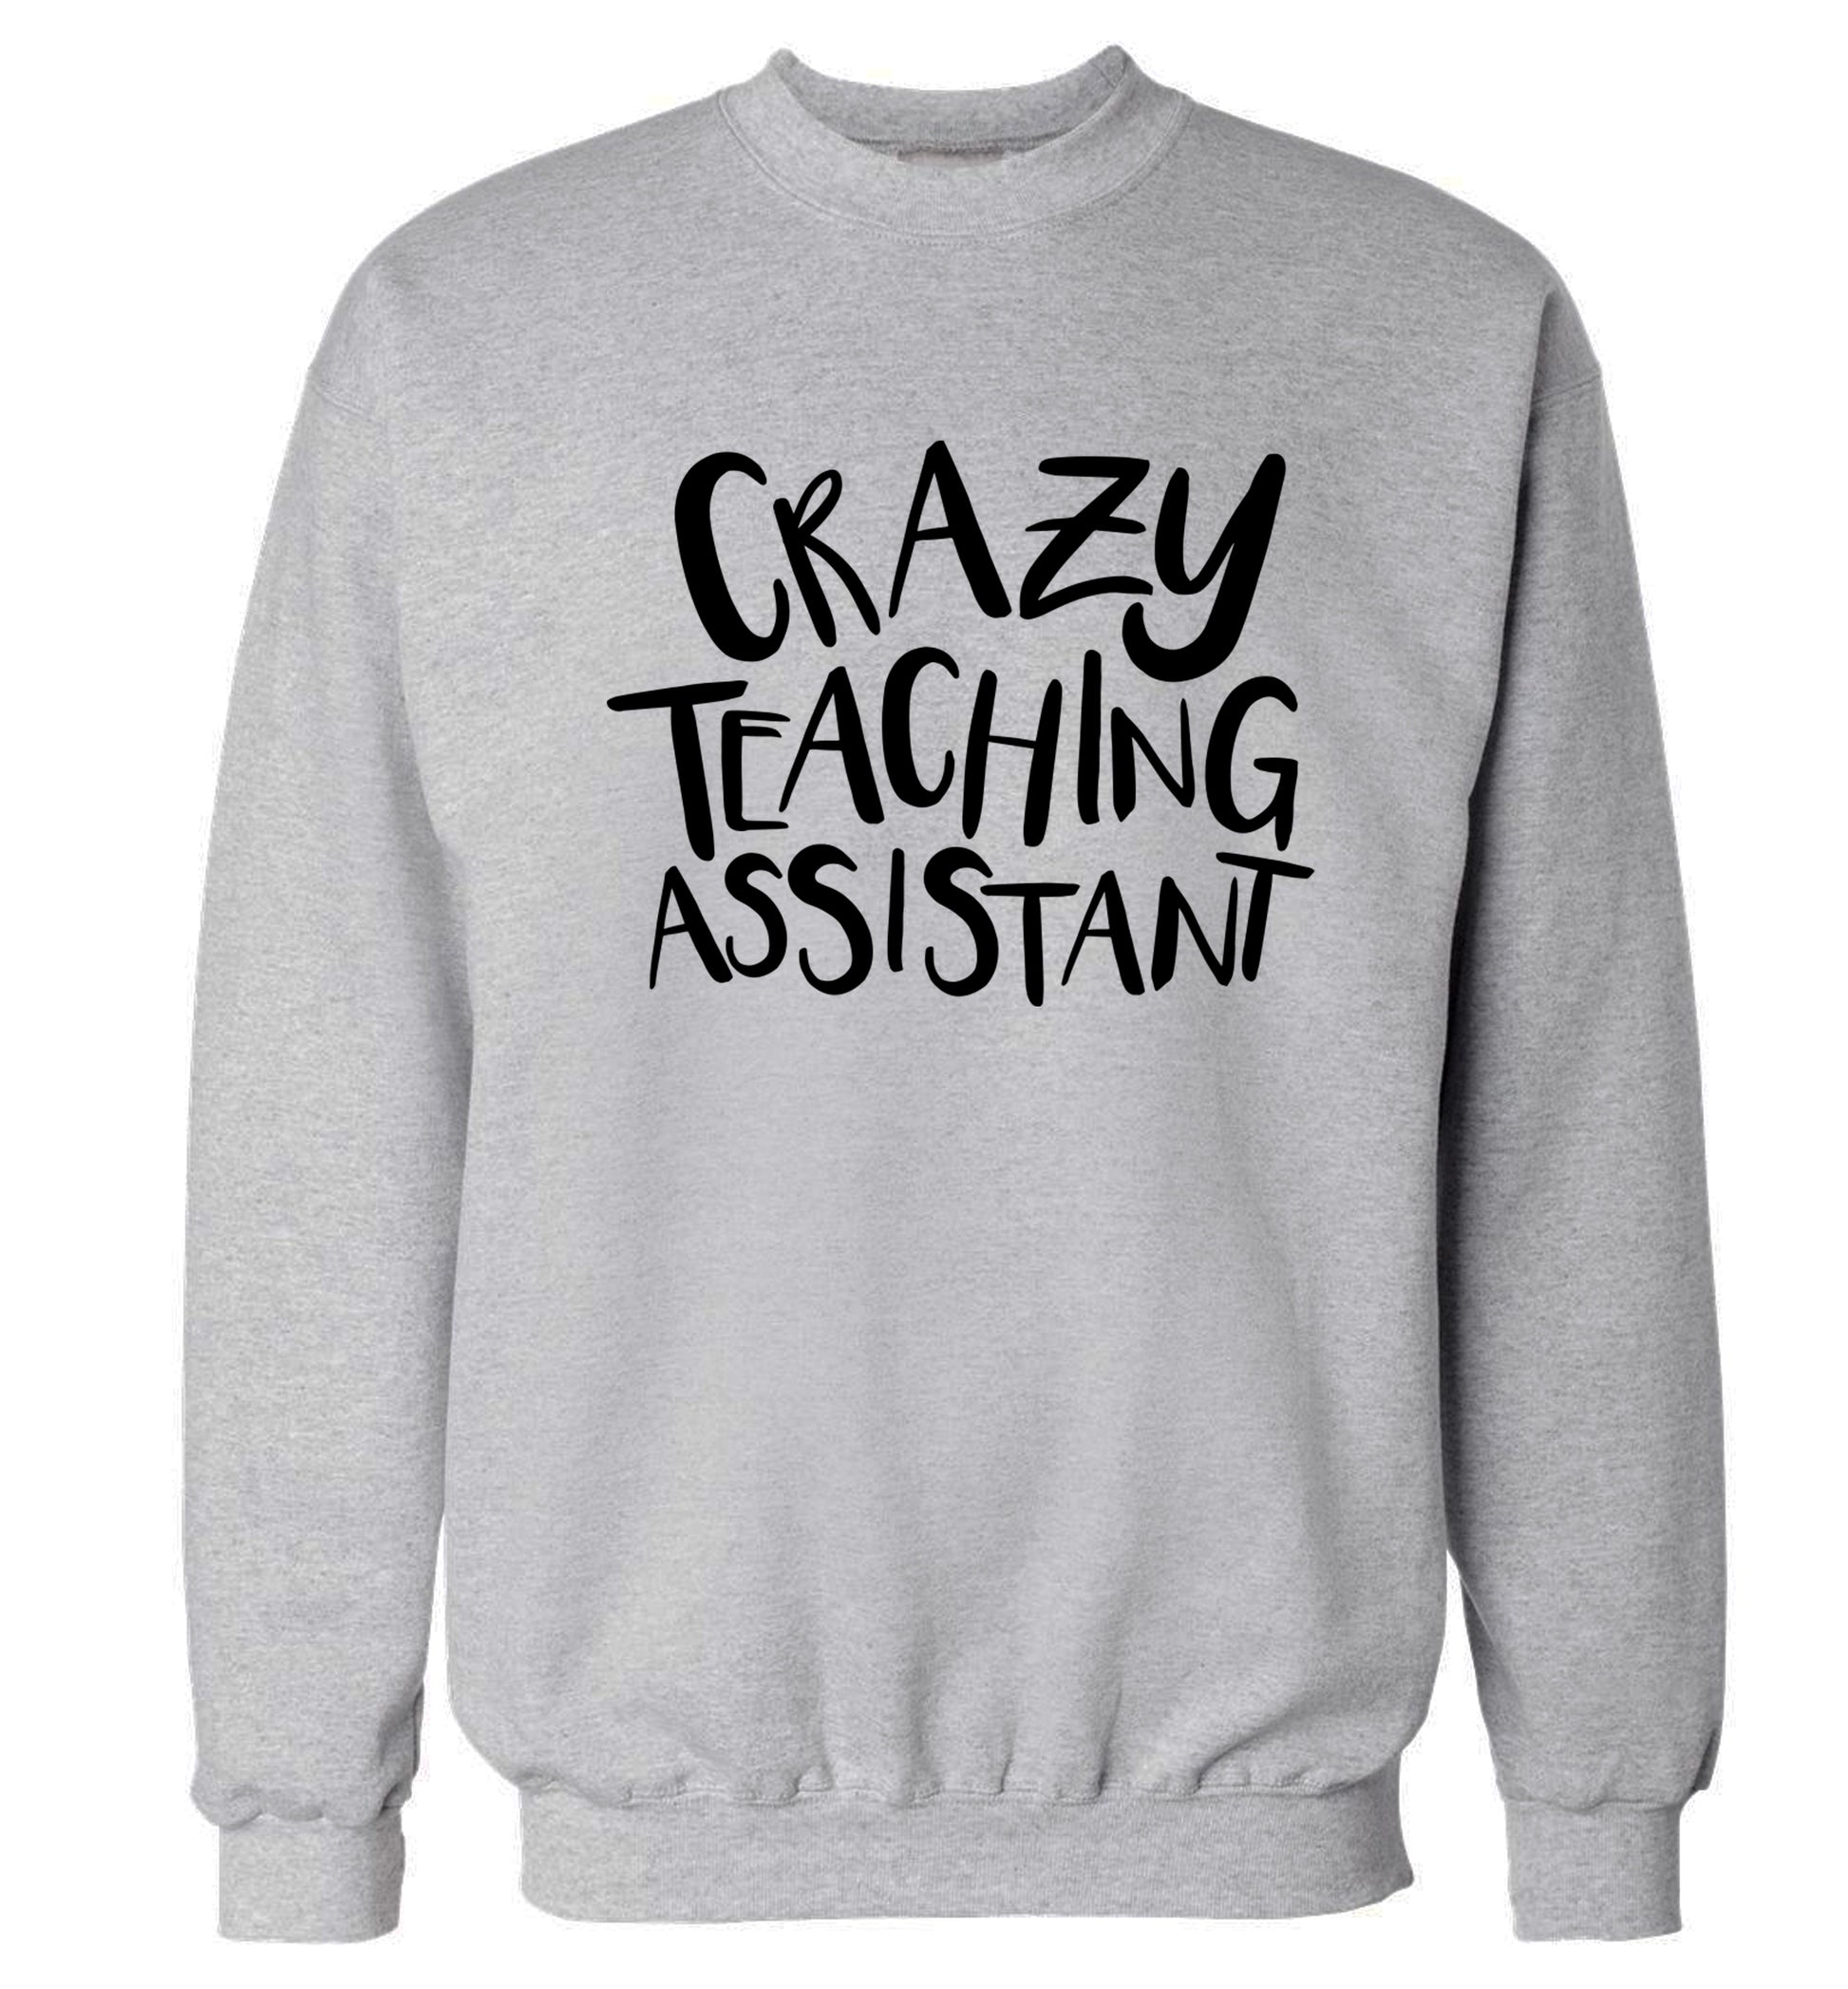 Crazy Teaching Assistant Adult's unisex grey Sweater 2XL